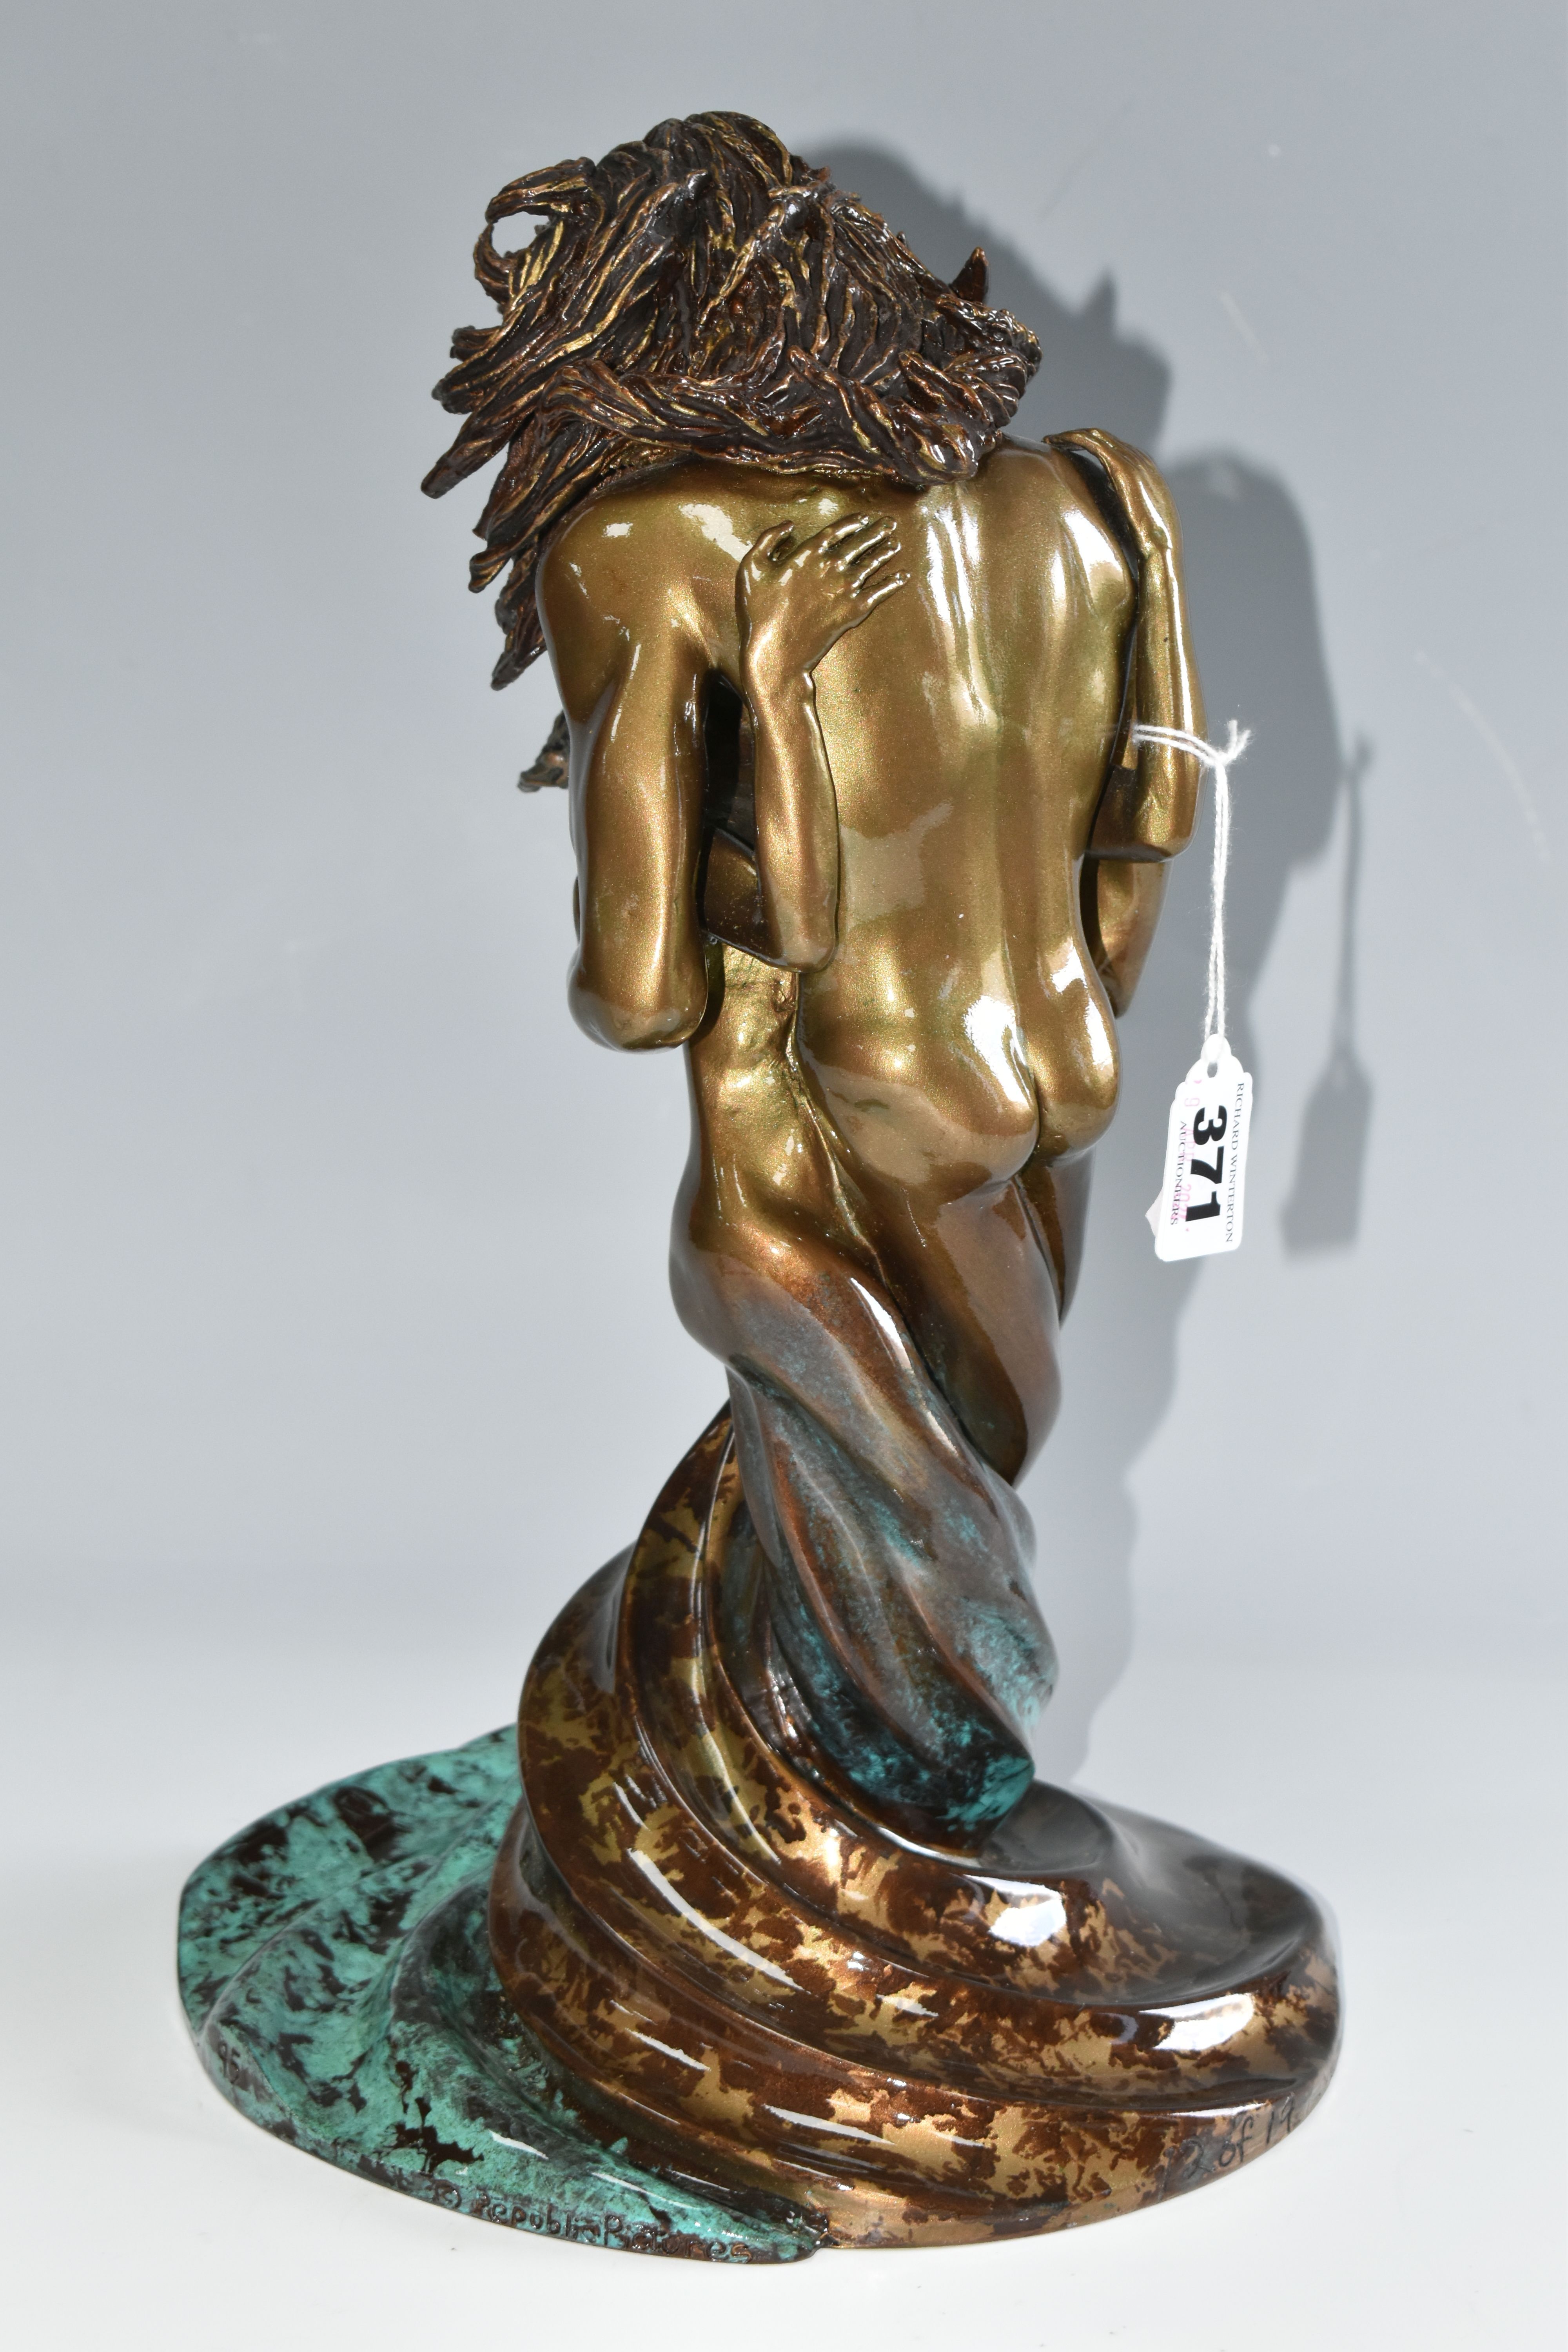 A LIMITED EDITION BONDED BRONZE OR BRONZED RESIN SCULPTURE, depicting two figures in an embrace, - Image 3 of 6